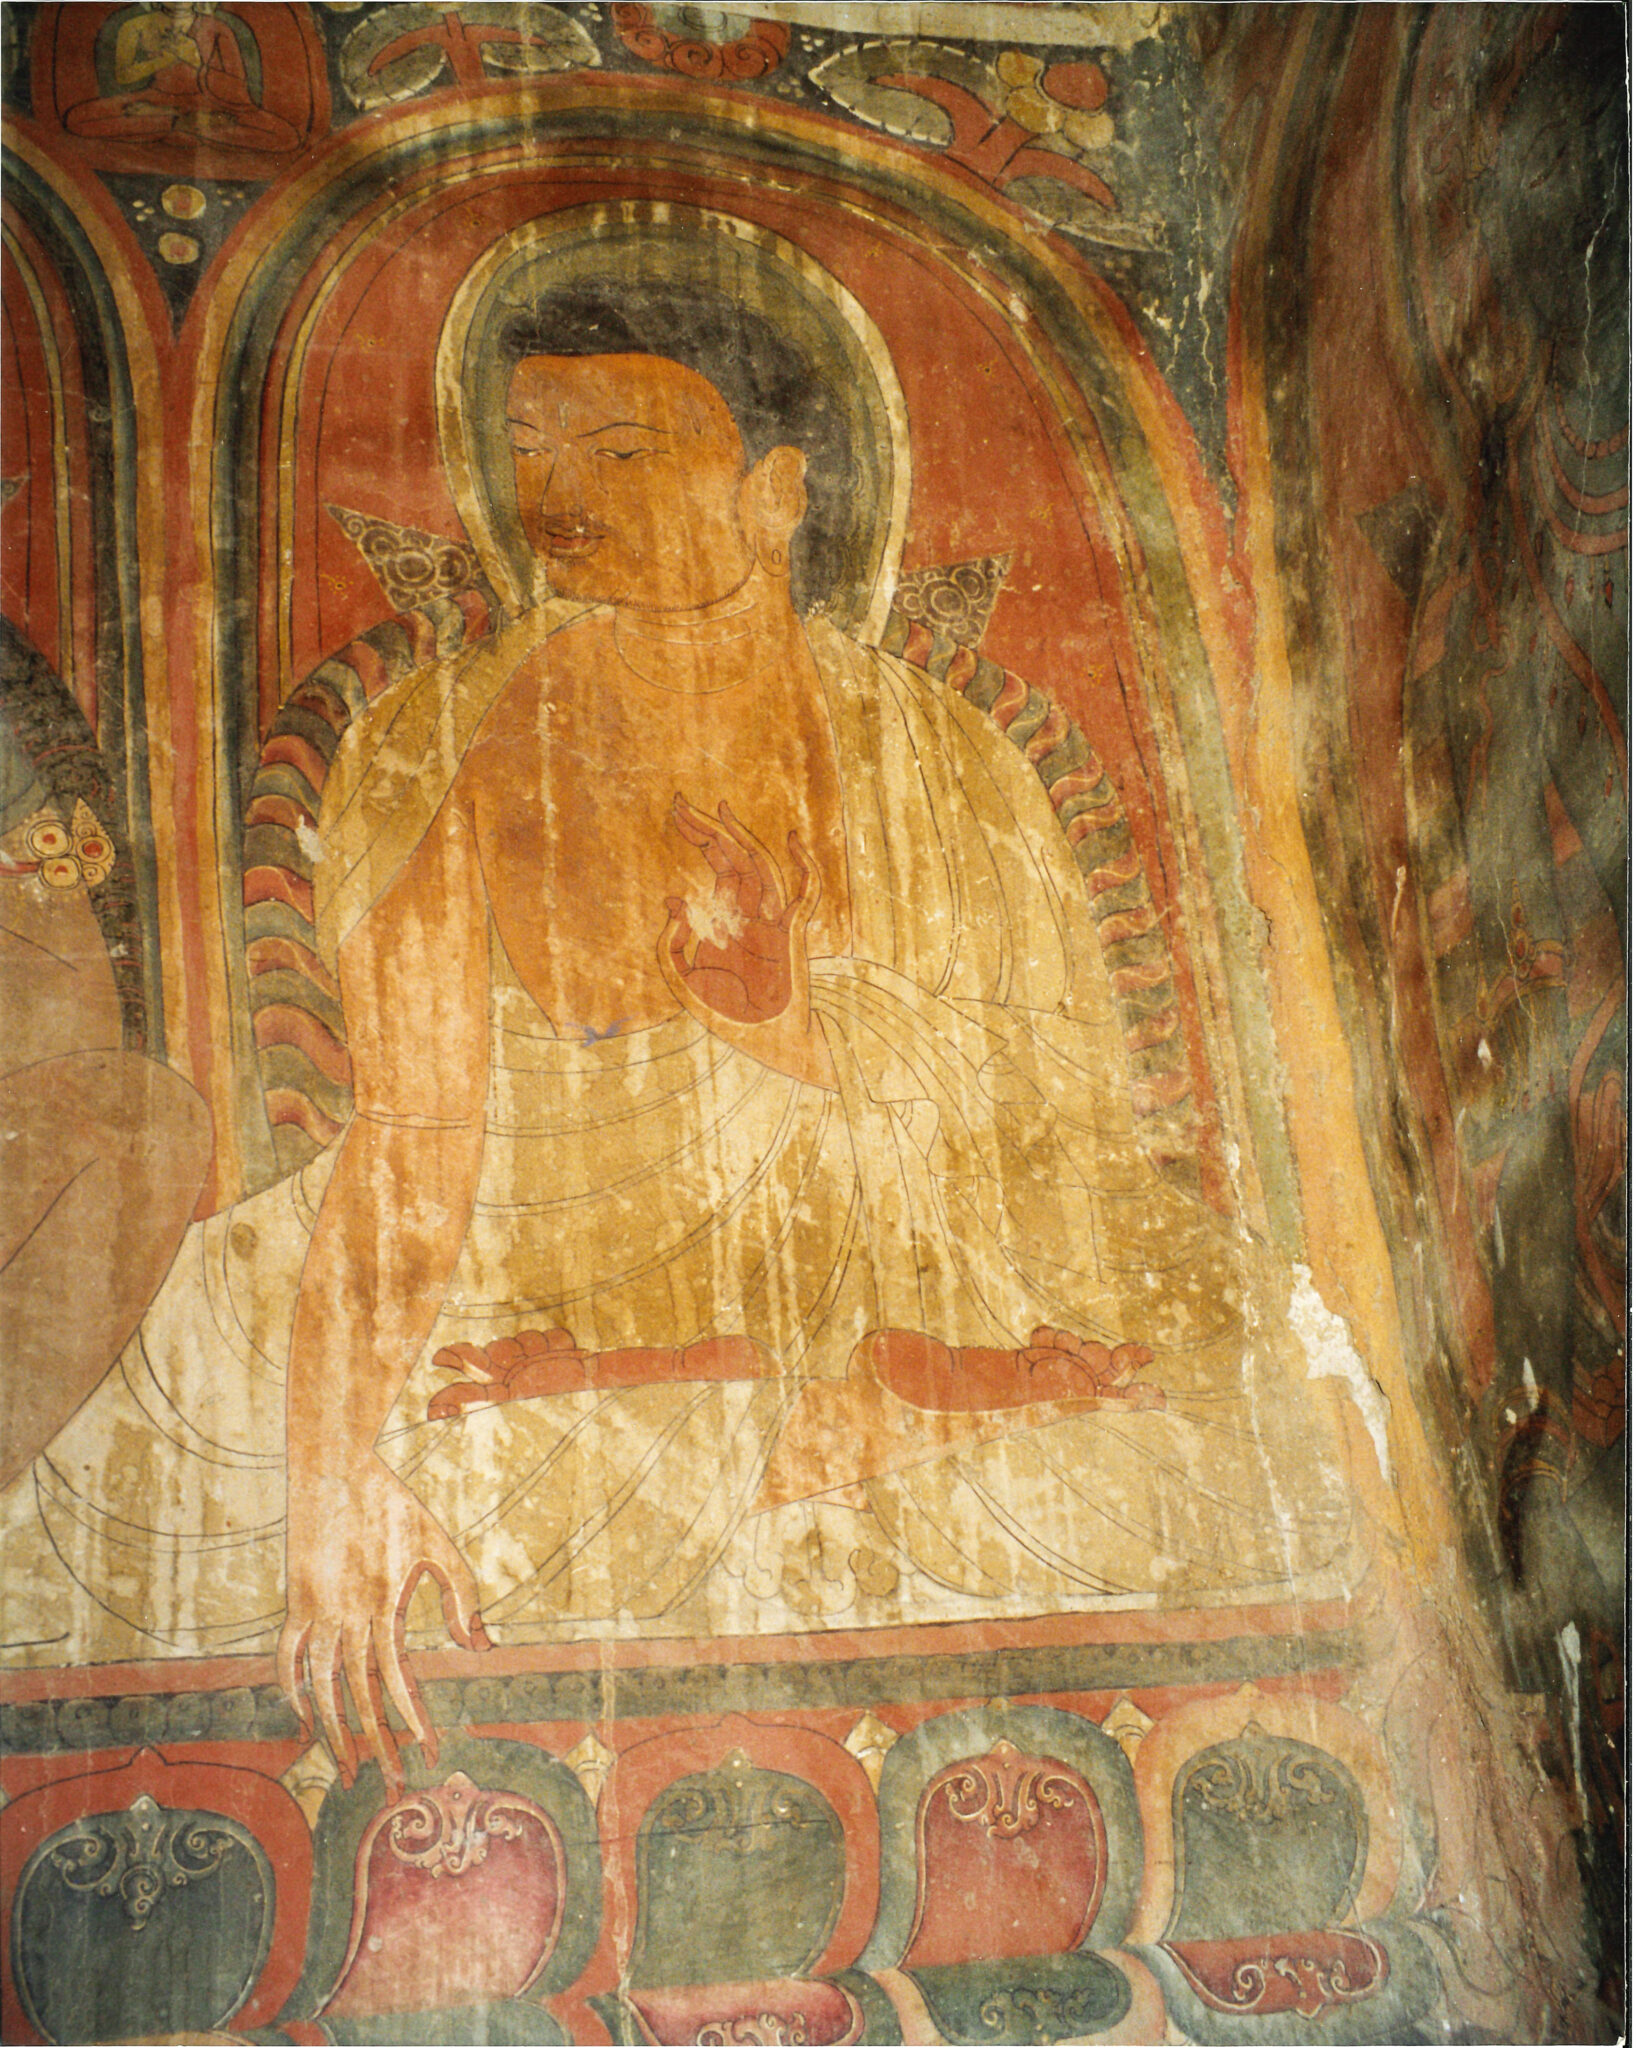 Water-damaged mural depicting Yogi wearing white robe, seated with hands posed in mudras